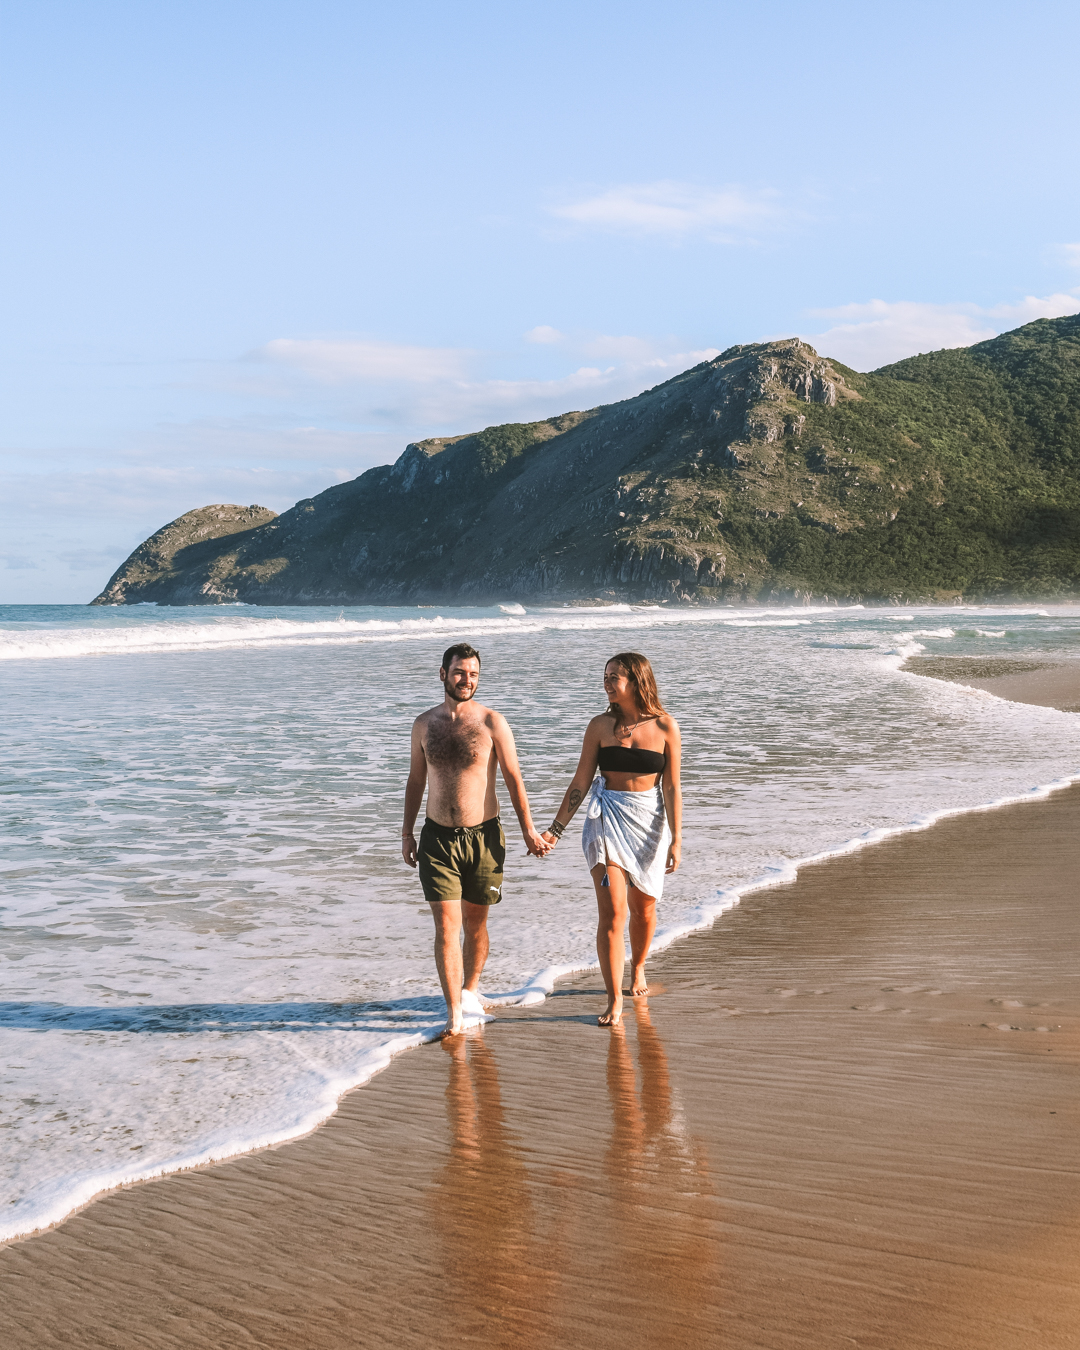 Top things to see in Florianopolis